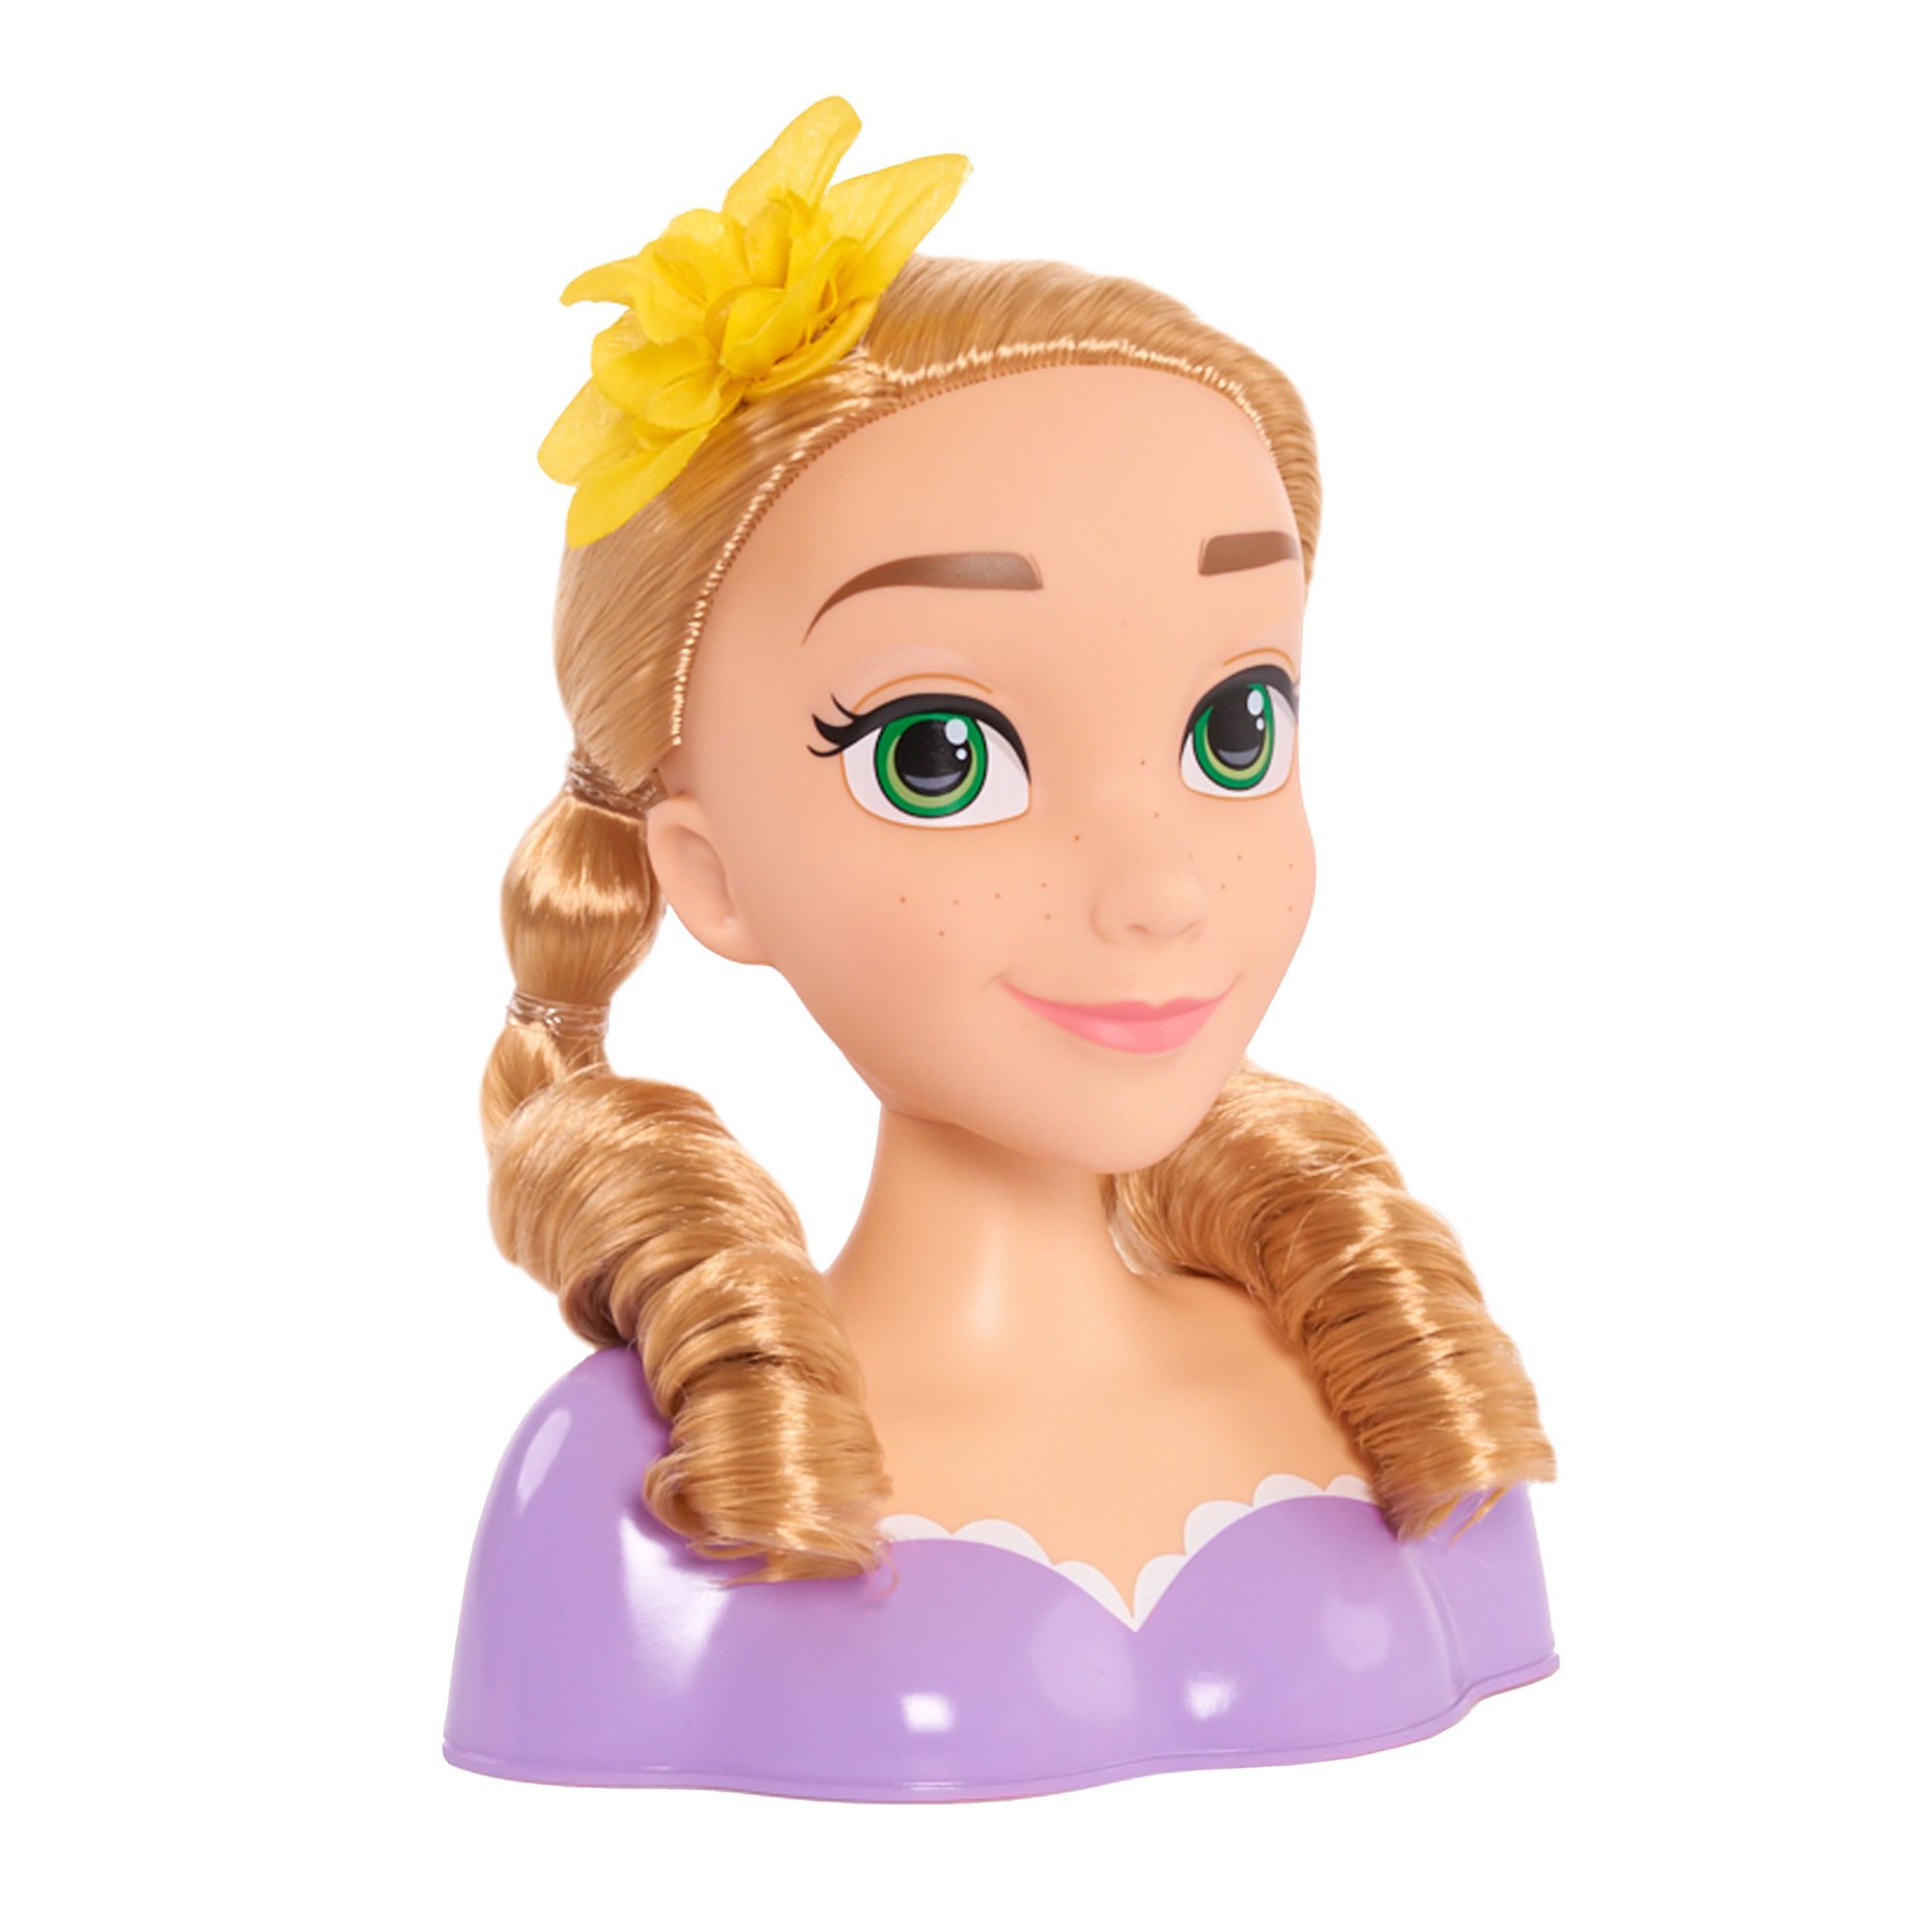 Disney Princess Rapunzel 14 Piece Tangled Styling Head with Accessories